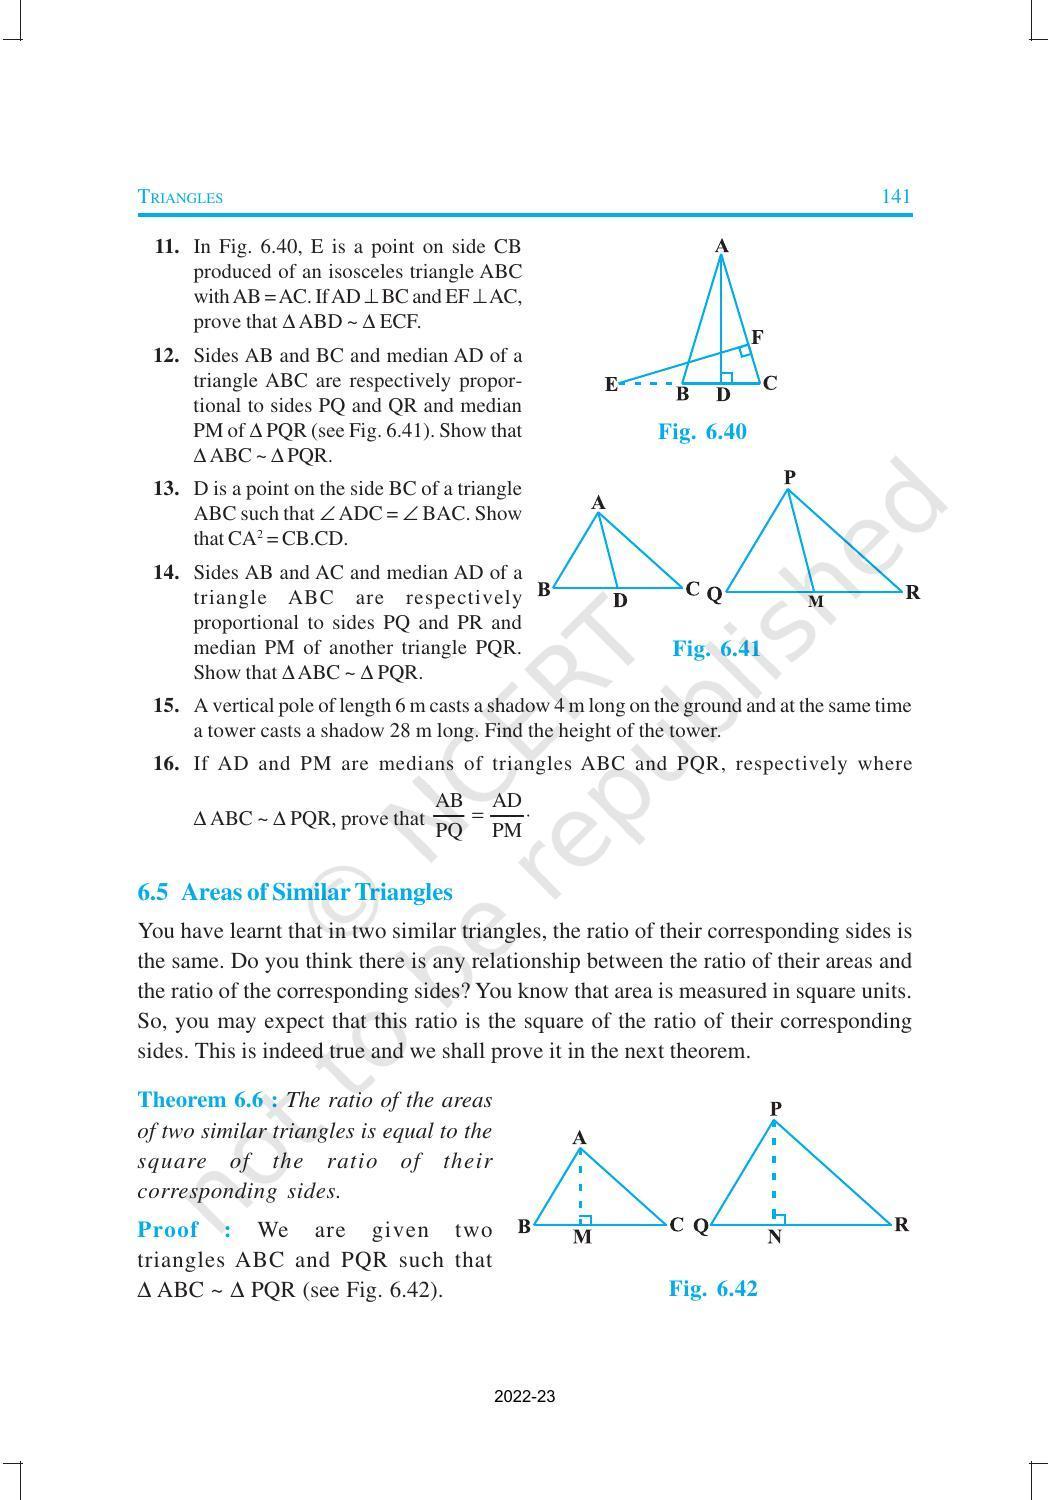 NCERT Book for Class 10 Maths Chapter 6 Triangles - Page 25